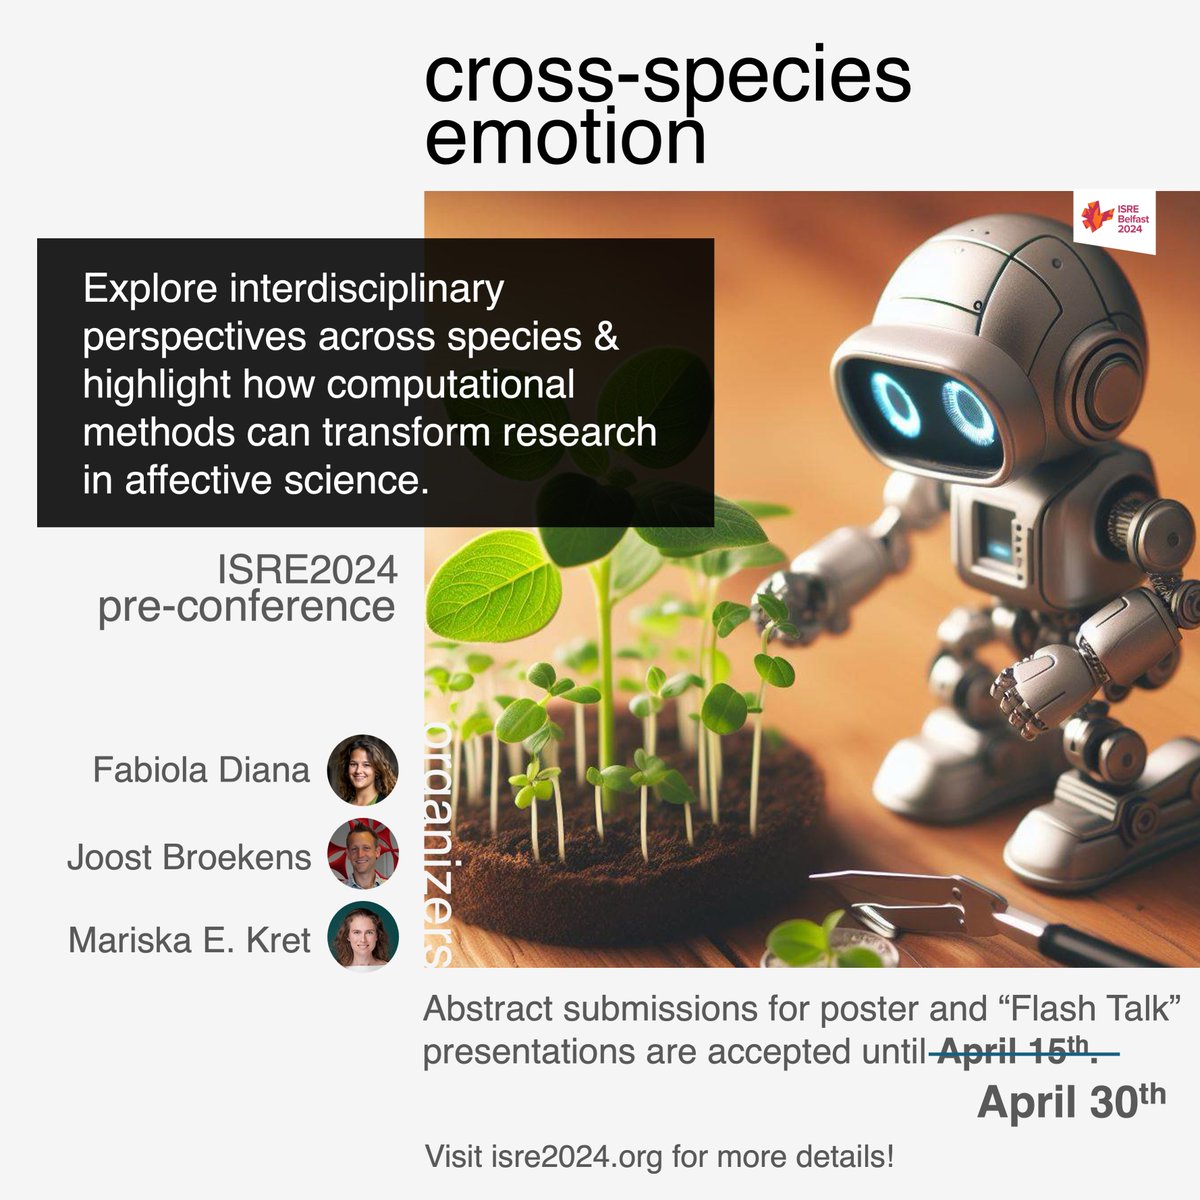 📢 DEADLINE EXTENDED! Now until April 30th, you can submit your contribution to the cross-species emotion #ISRE2024 pre-conference. Check out details & a list of distinguished invited speakers at sites.google.com/view/cse-works…